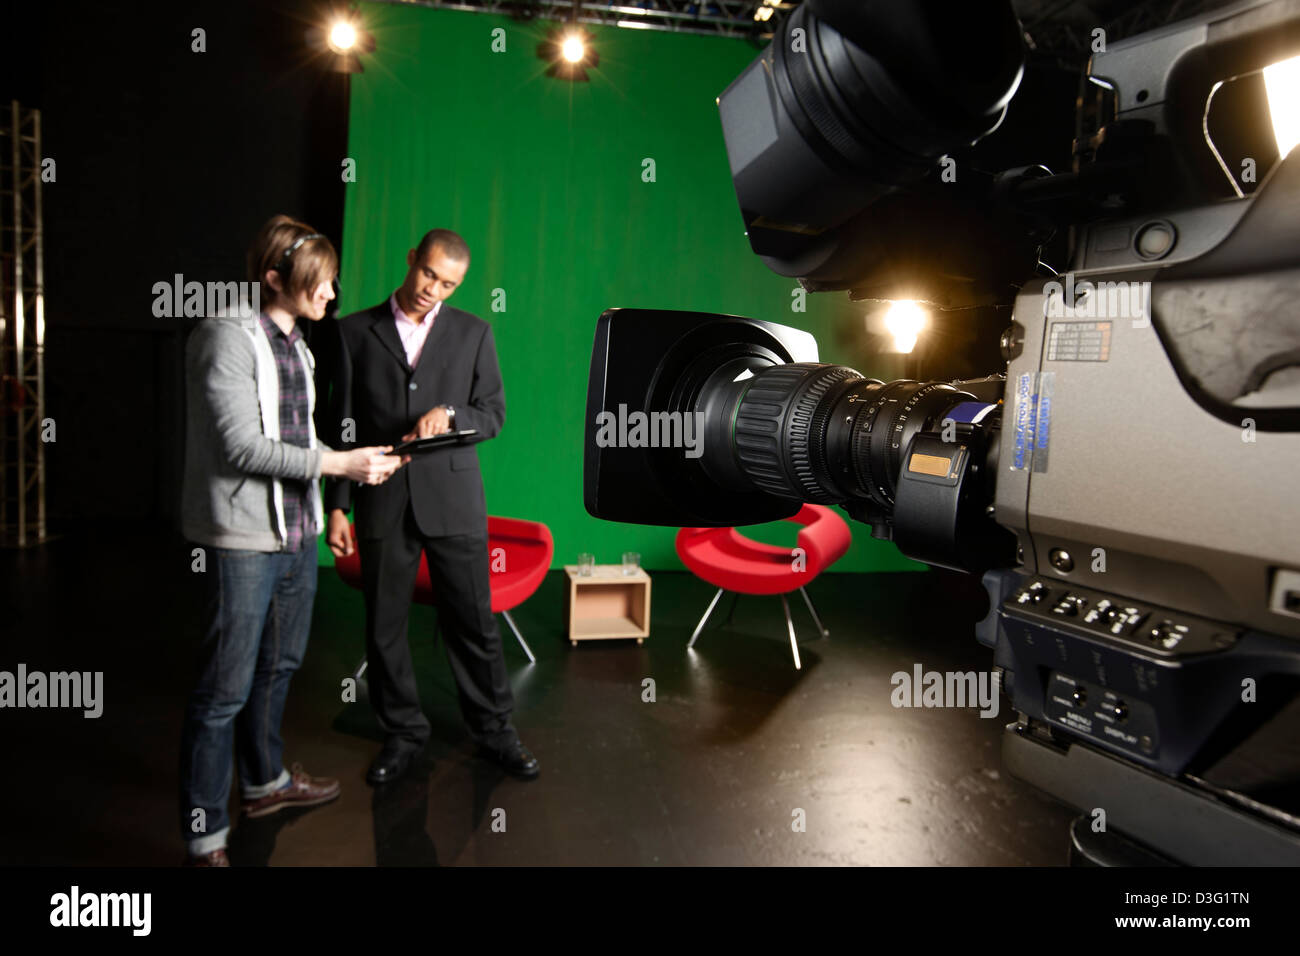 Foreground Television camera with floor manager and presenter out-of-focus in the background. Stock Photo